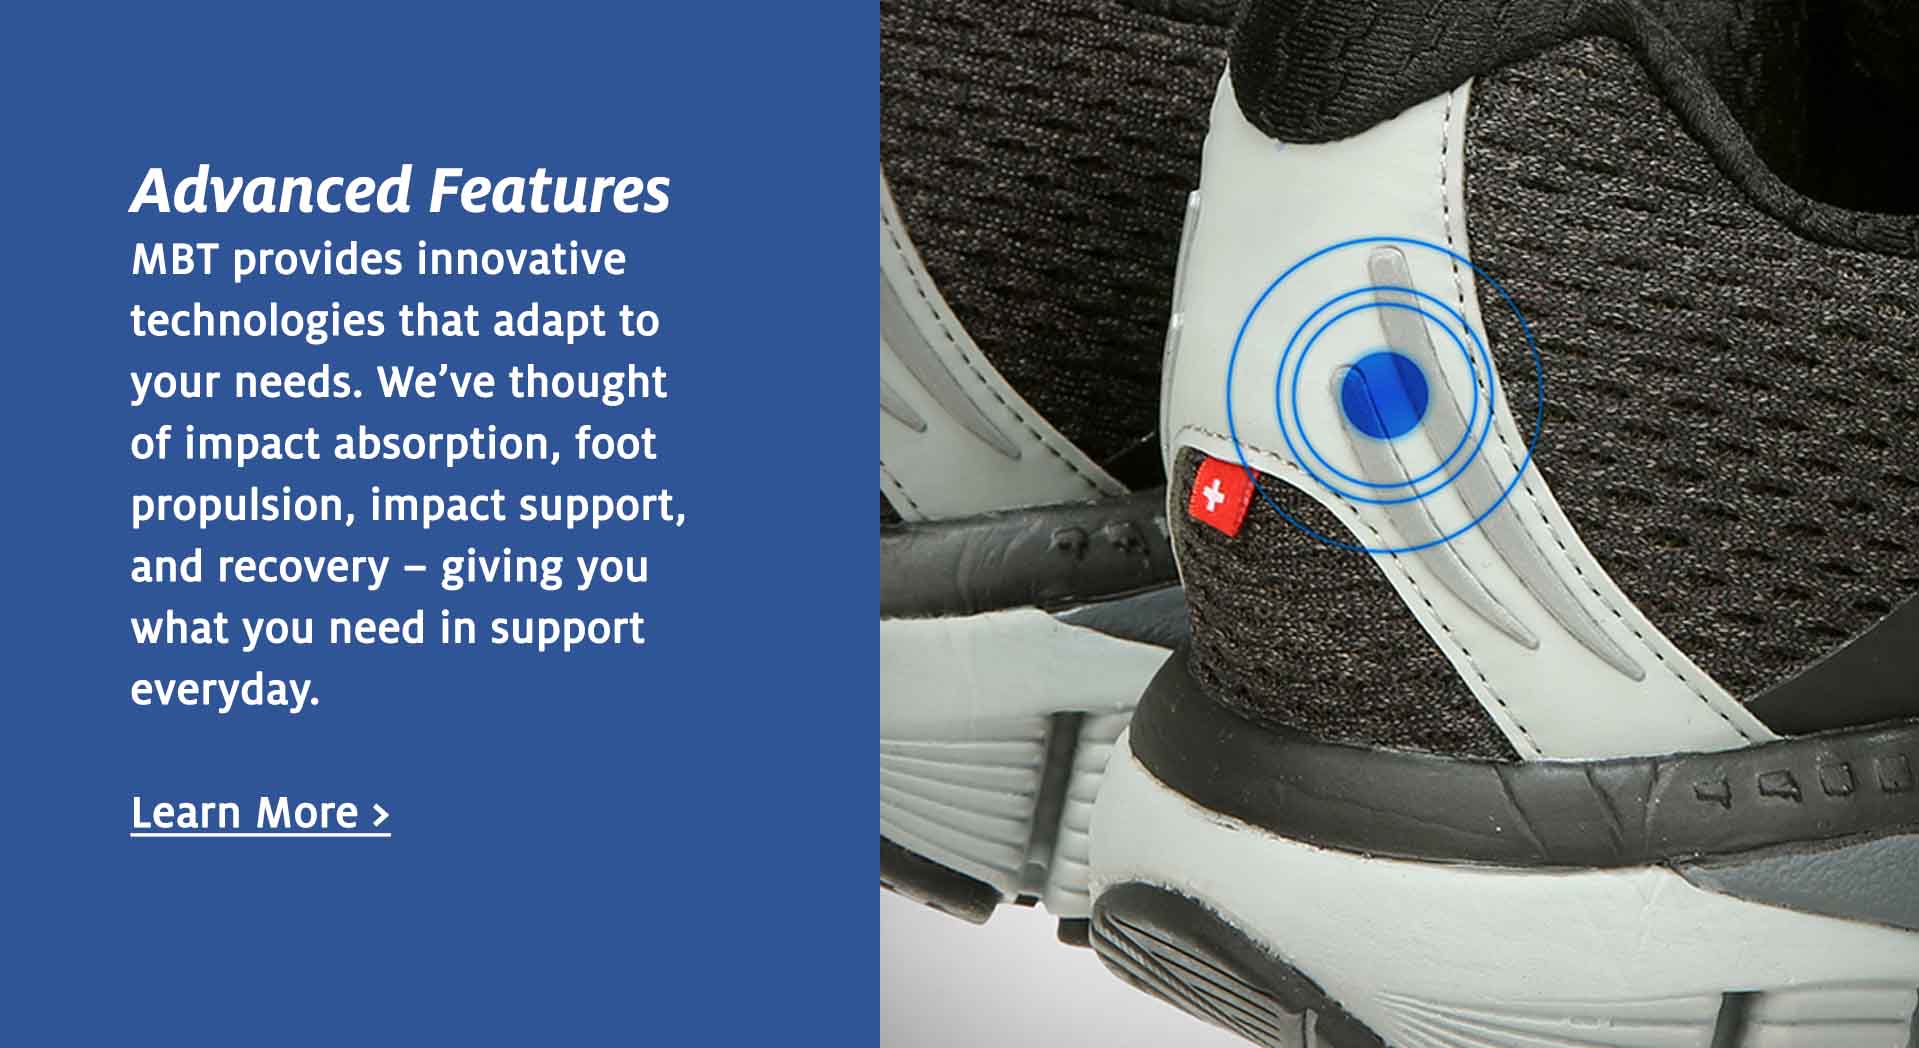 Advanced Features in MBT Shoes